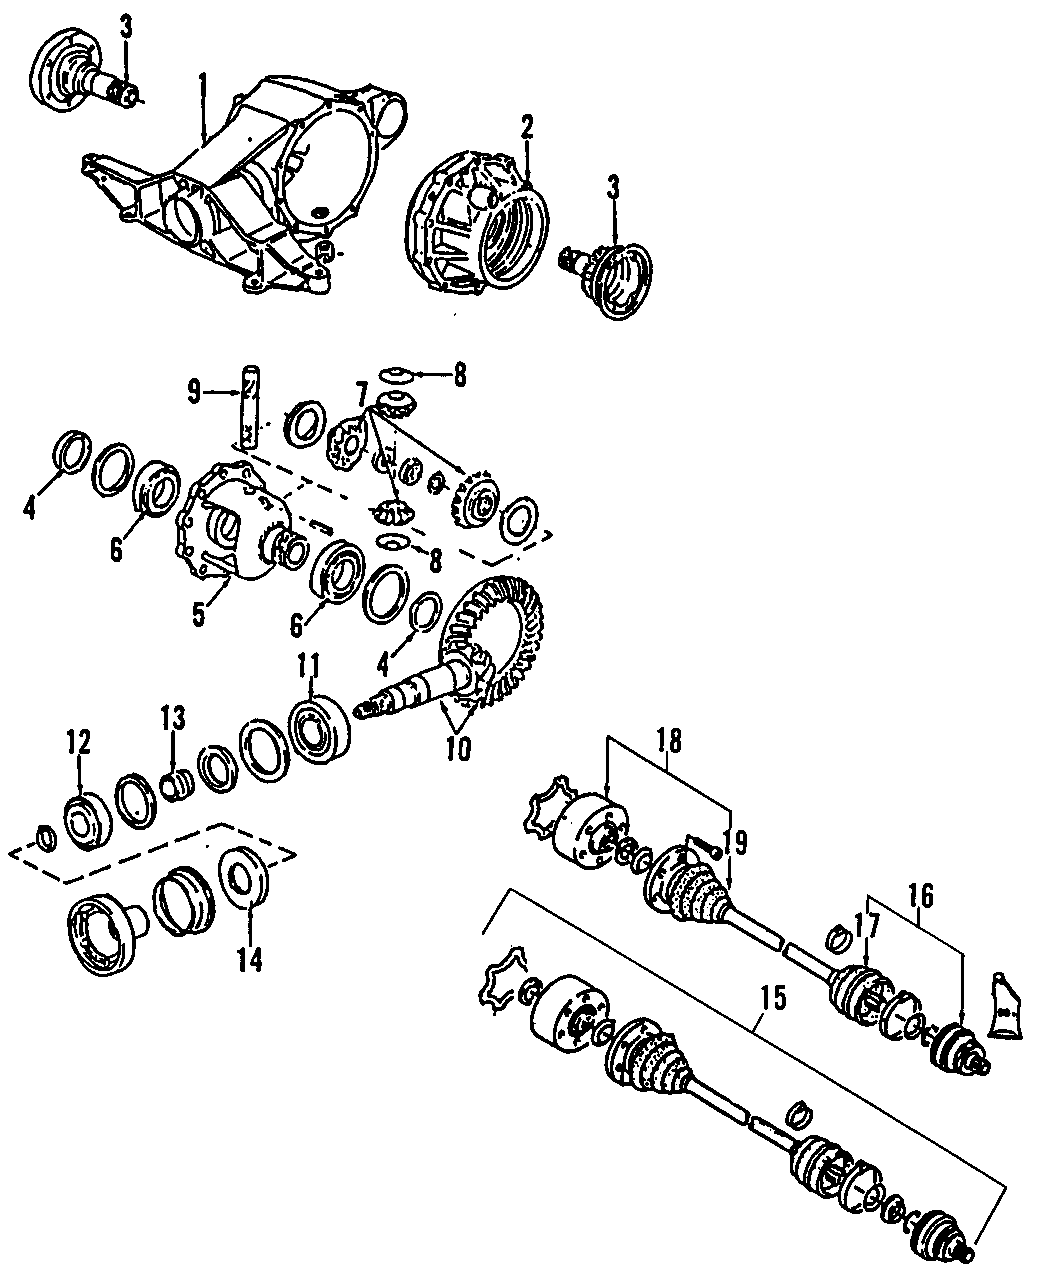 16DRIVE AXLES. REAR AXLE. AXLE SHAFTS & JOINTS. DIFFERENTIAL. PROPELLER SHAFT.https://images.simplepart.com/images/parts/motor/fullsize/F257120.png